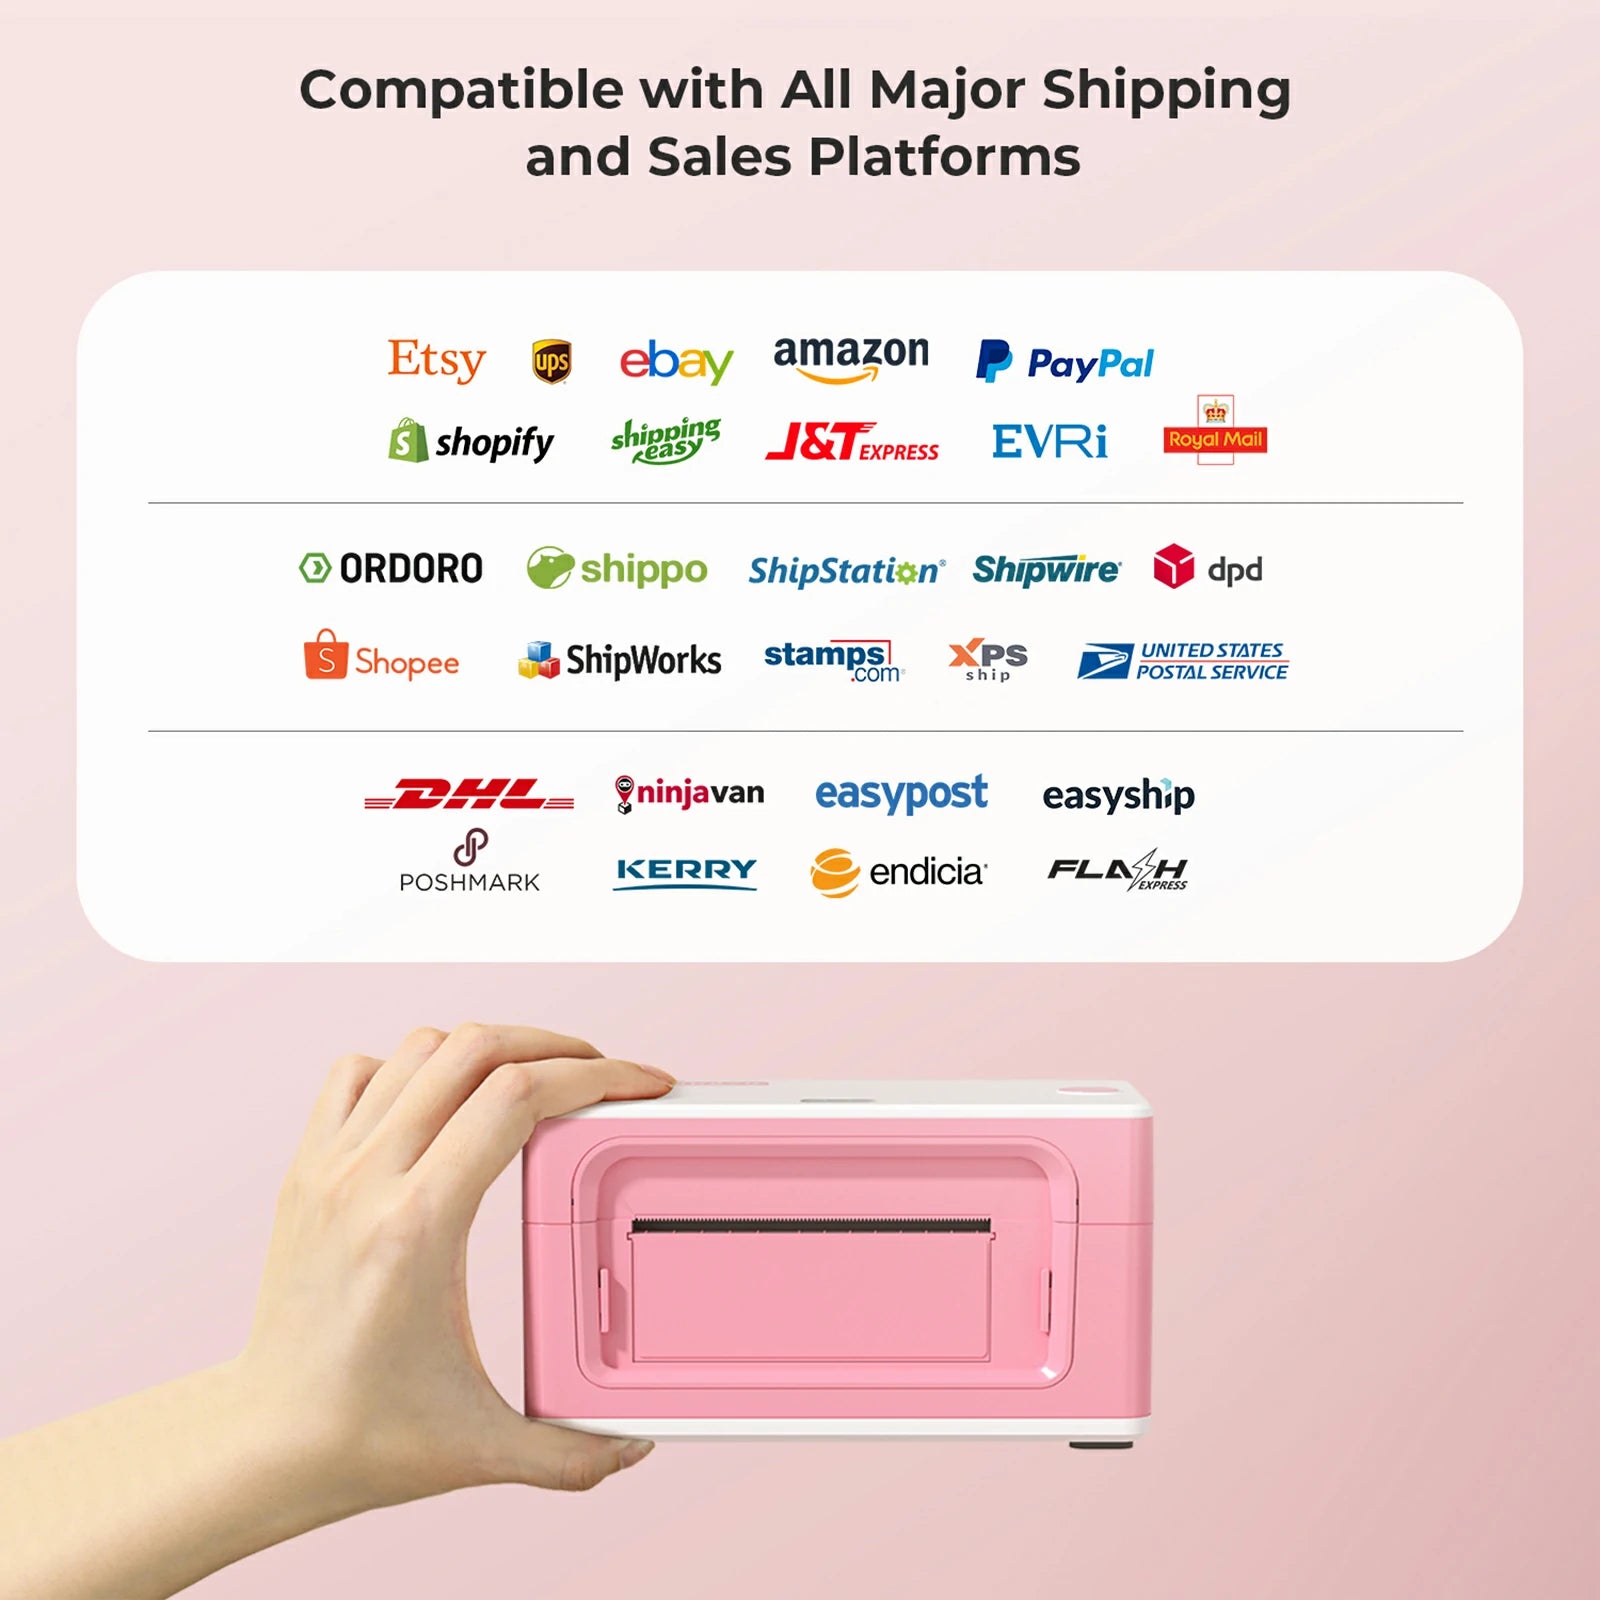 MUNBYN P941 Thermal Label Printer is compatible with various selling and shipping platforms, such as Shopify, Etsy, Amazon, eBay, USPS, and FedEx.